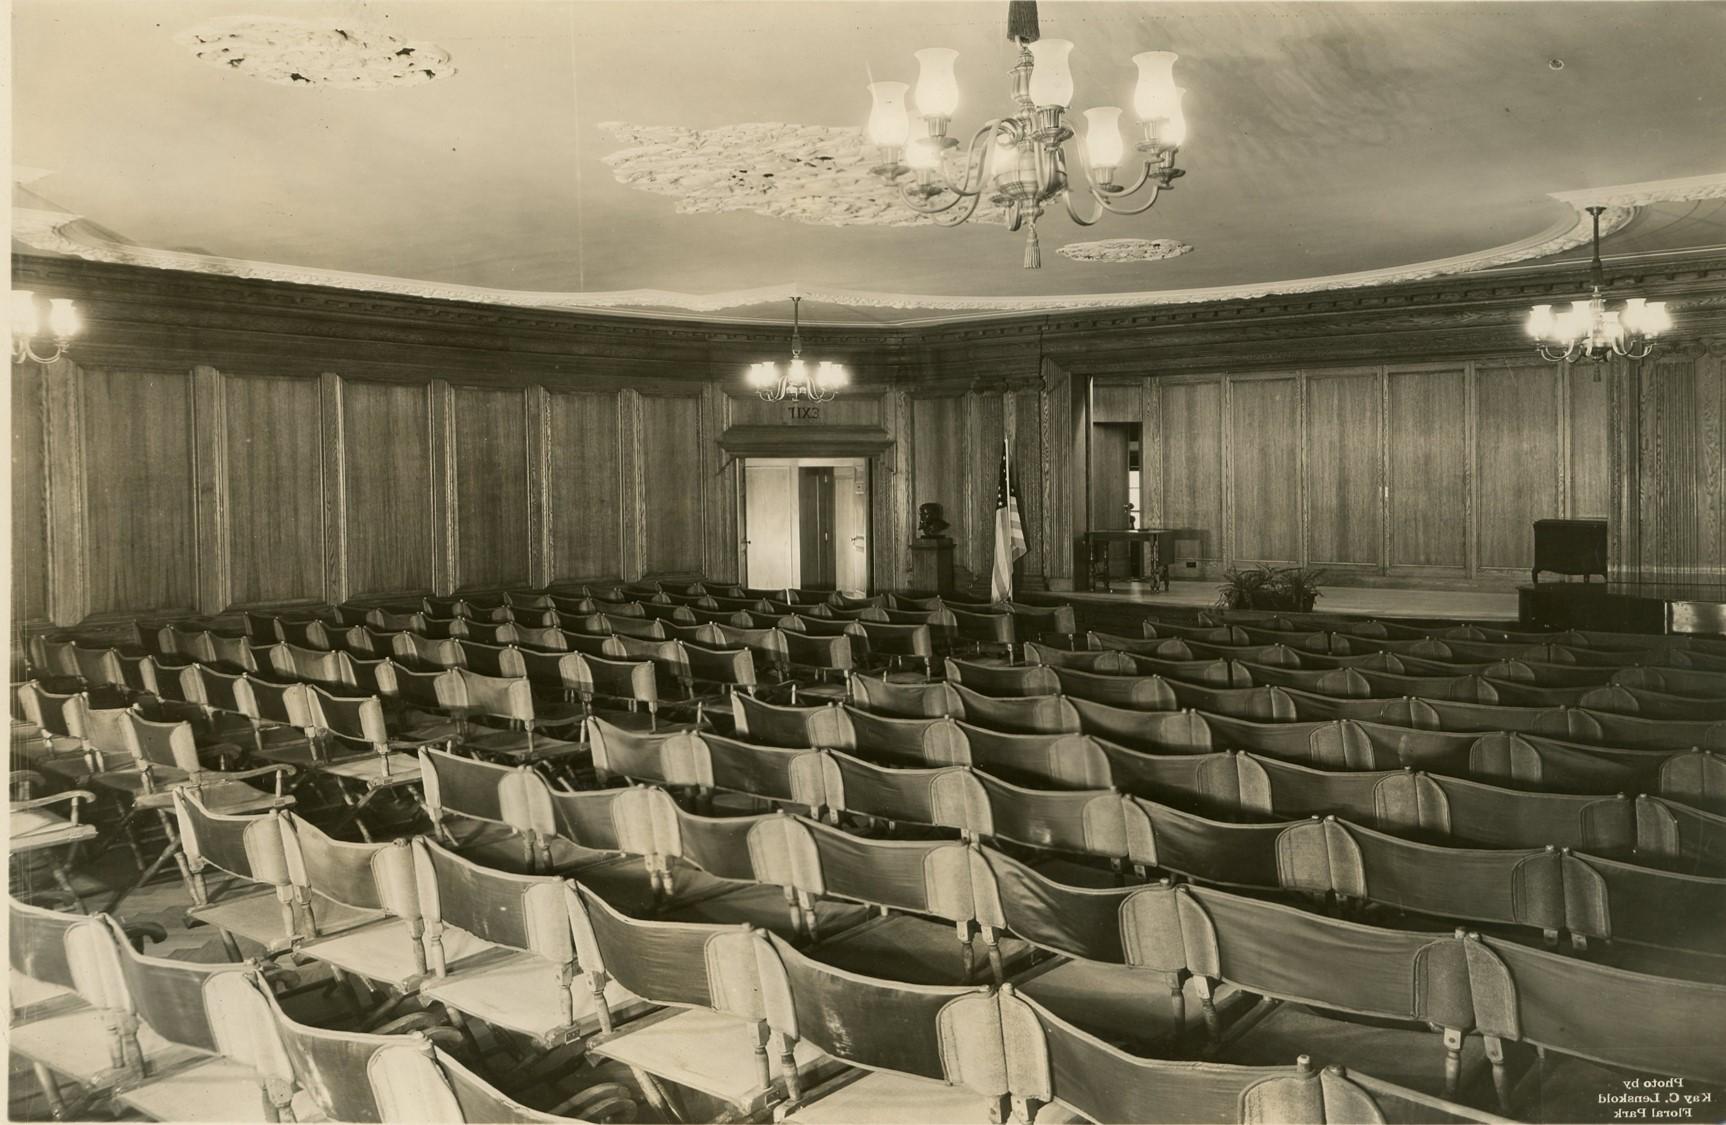 Sepia photograph of auditorium full of chairs in rows